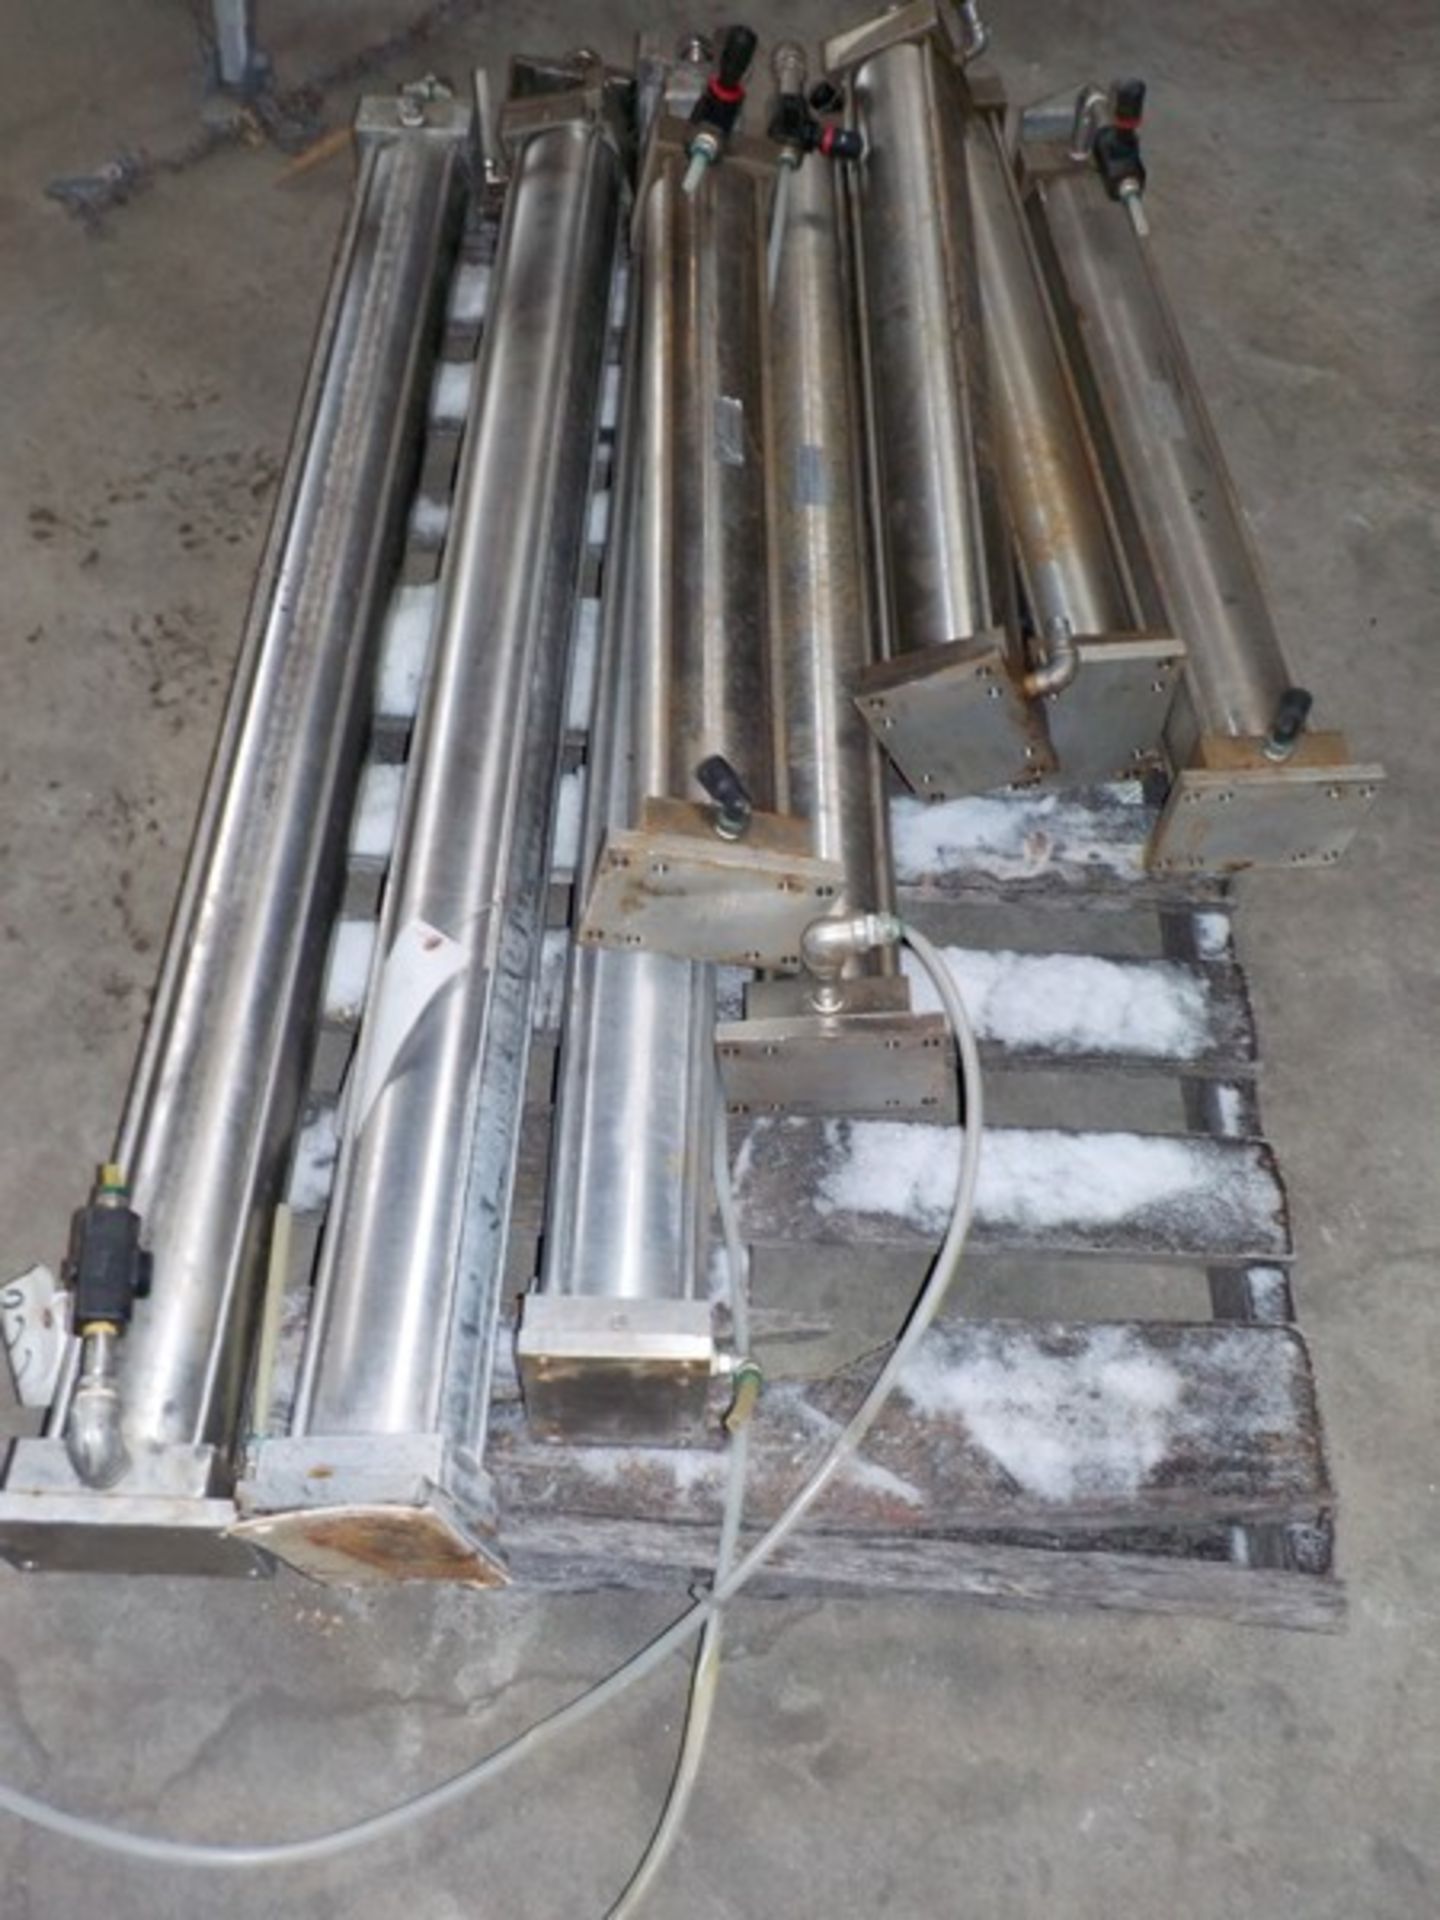 Lot of Stainless Steel Air Cylinders; 13 Cylinders Include (7)-4" X 5", (4) 4"X 28", and (2) 4" X